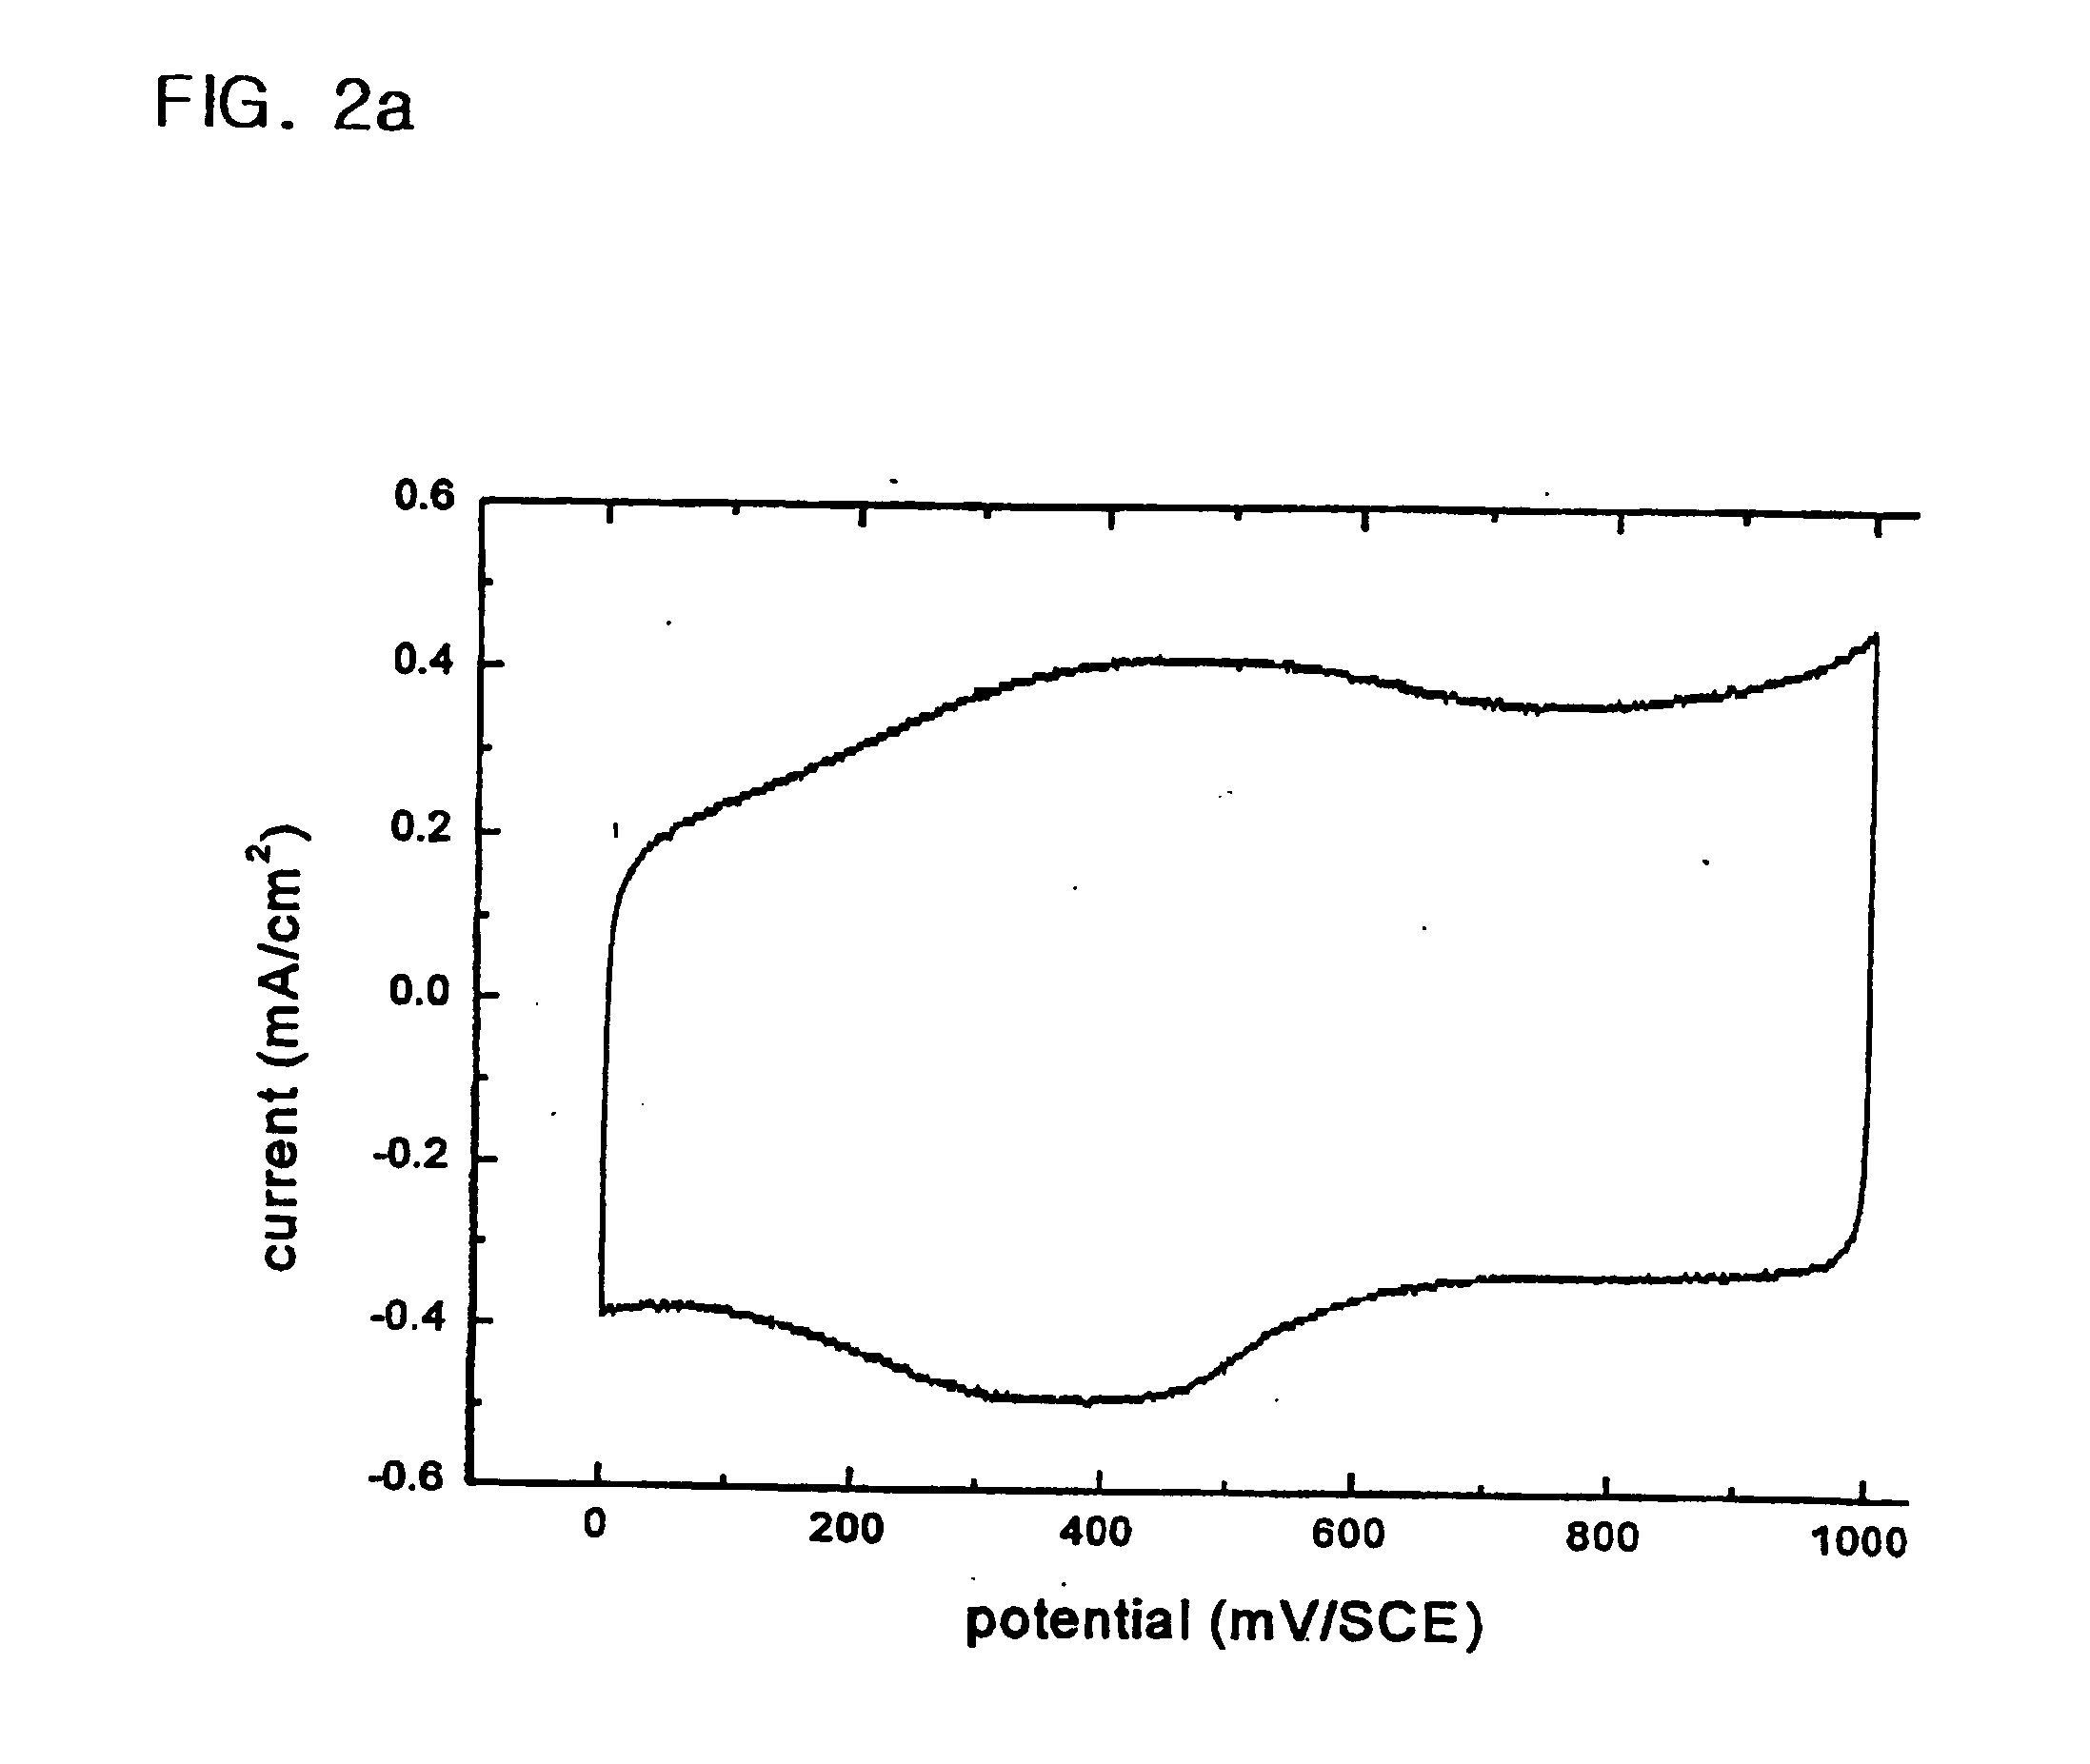 Apparatus and method for manufacturing thin film electrode of hydrous ruthenium oxide